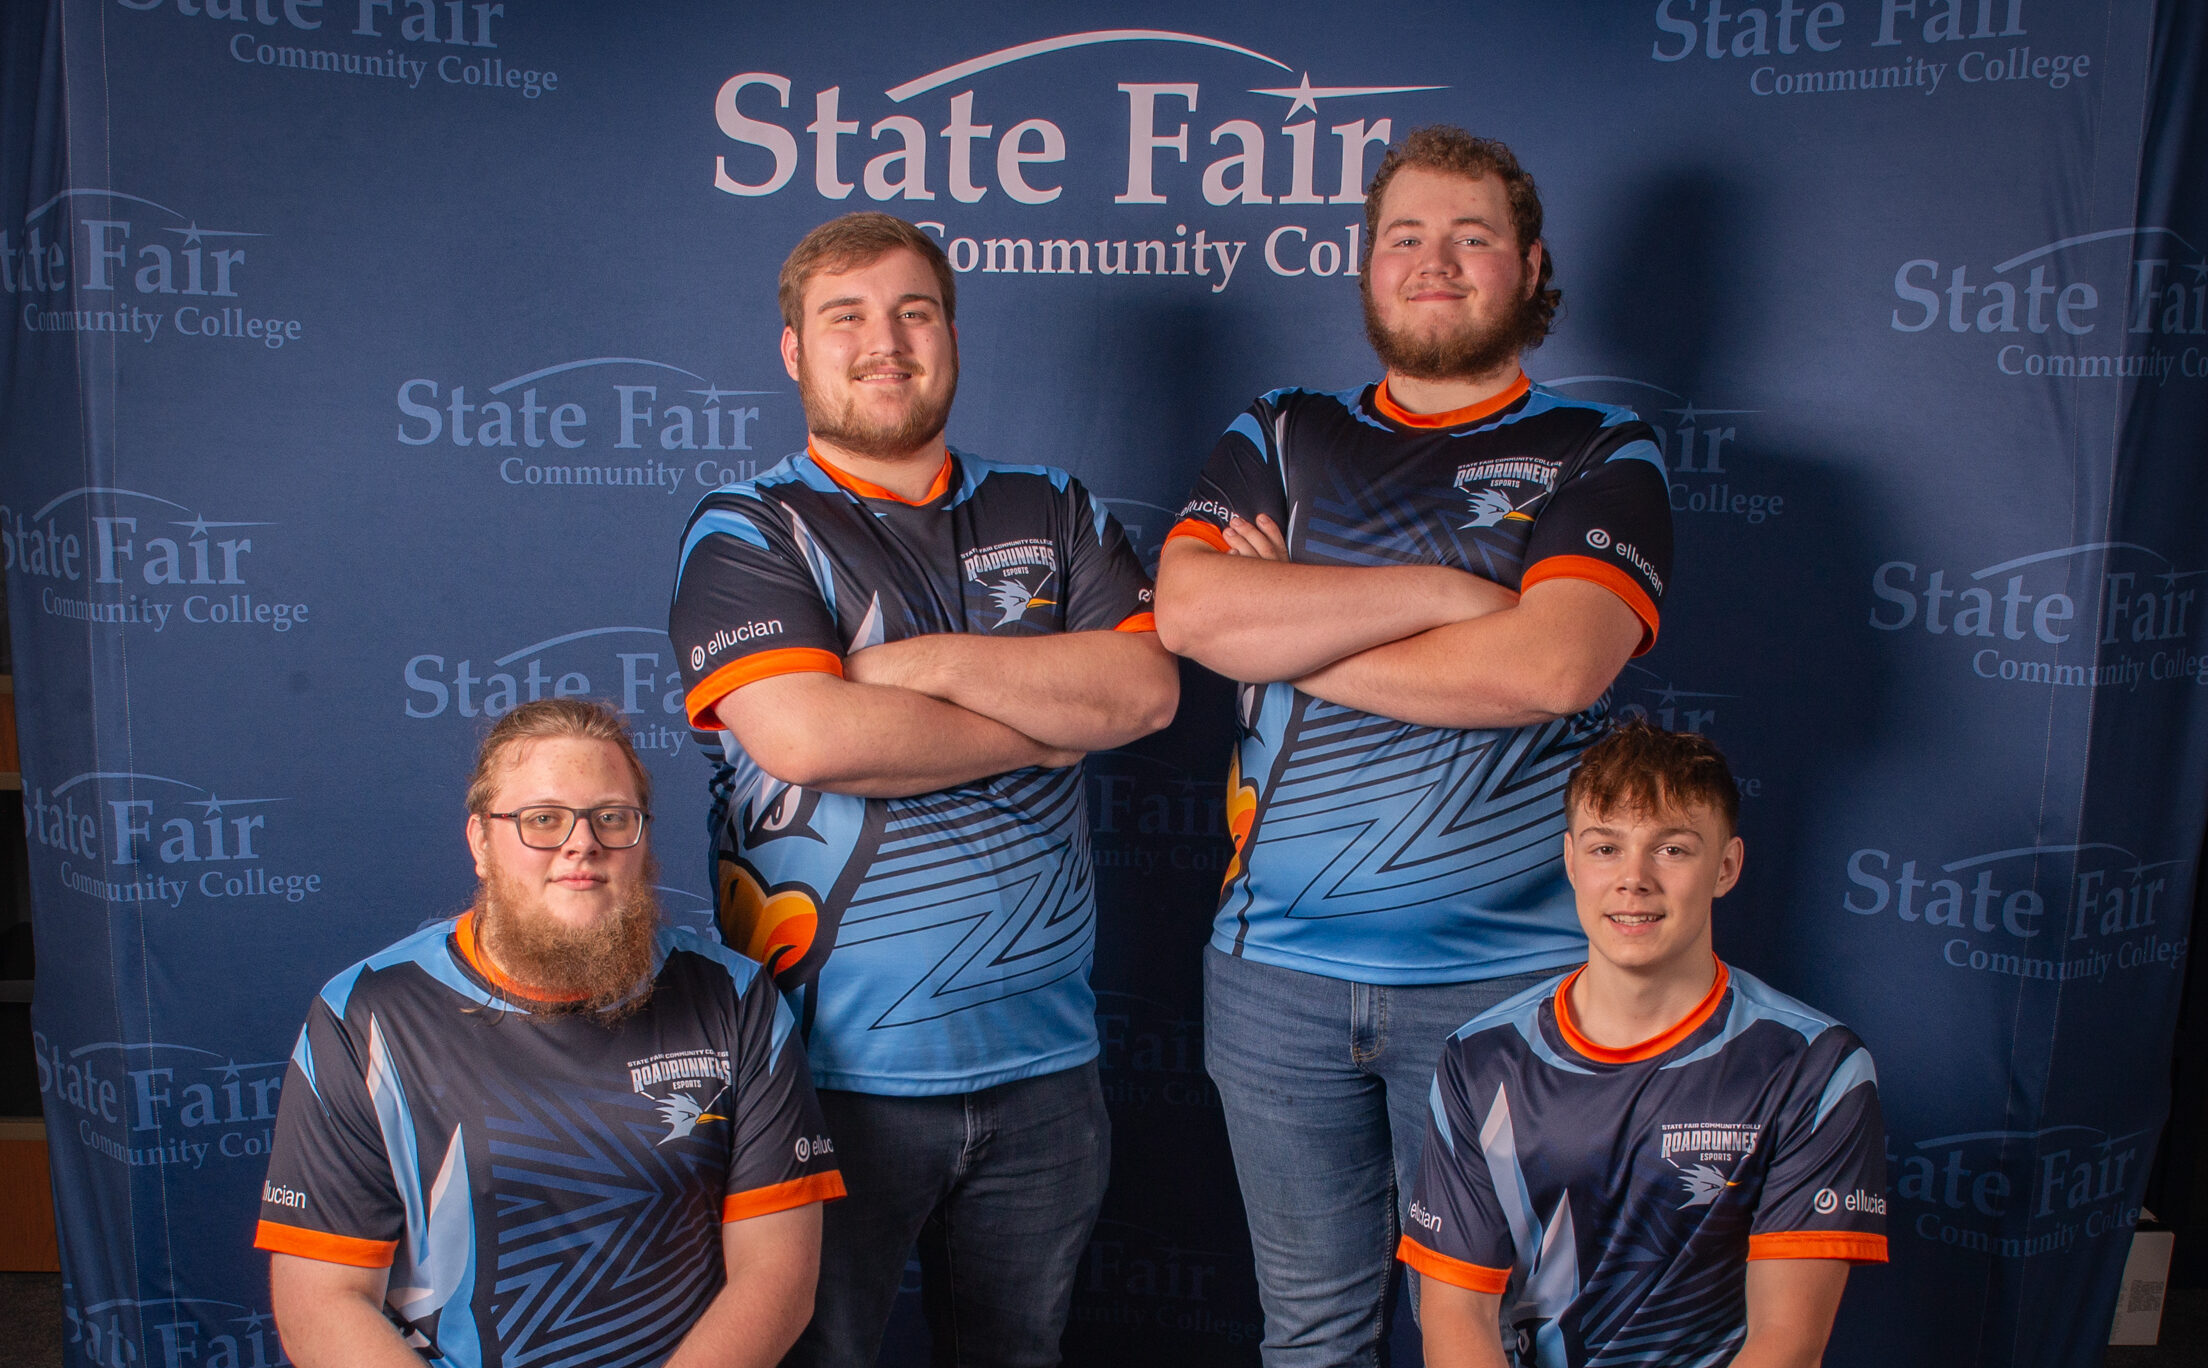 Read more about SFCC Esports wins NJCAAE Rainbow Six Siege National Championship and receives second place for Rocket League